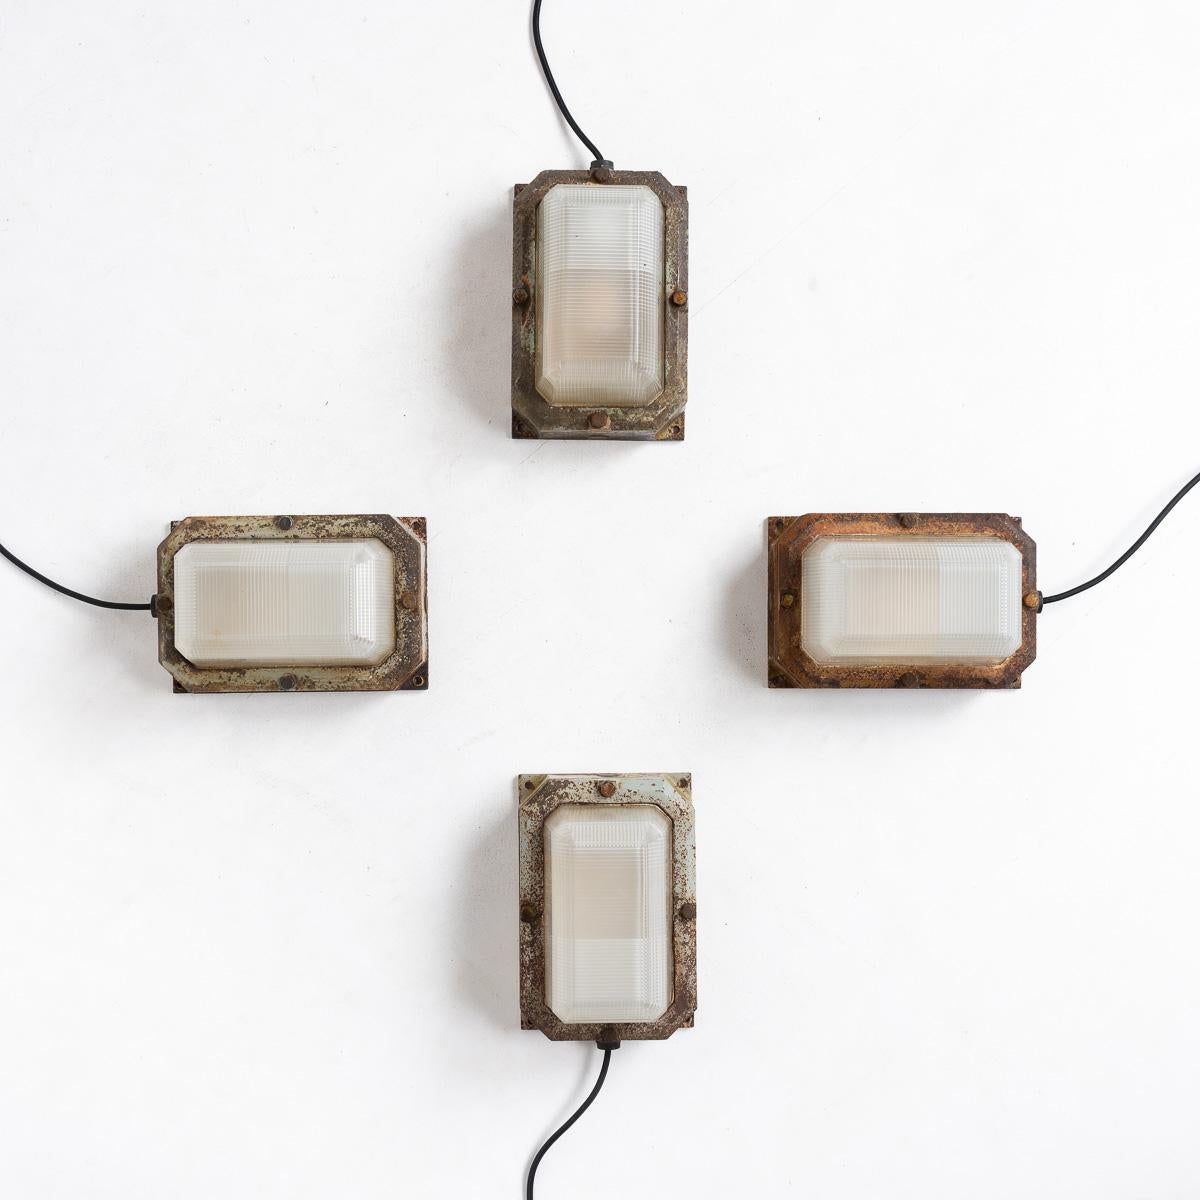 Reclaimed Heavy Industrial Flameproof Bulkhead Light Fittings By Holophane

4 Available at the time of listing

Priced Individually

Small and robust bulkhead lights removed from a military complex in Scotland.

The stunning Art Deco inspired lights